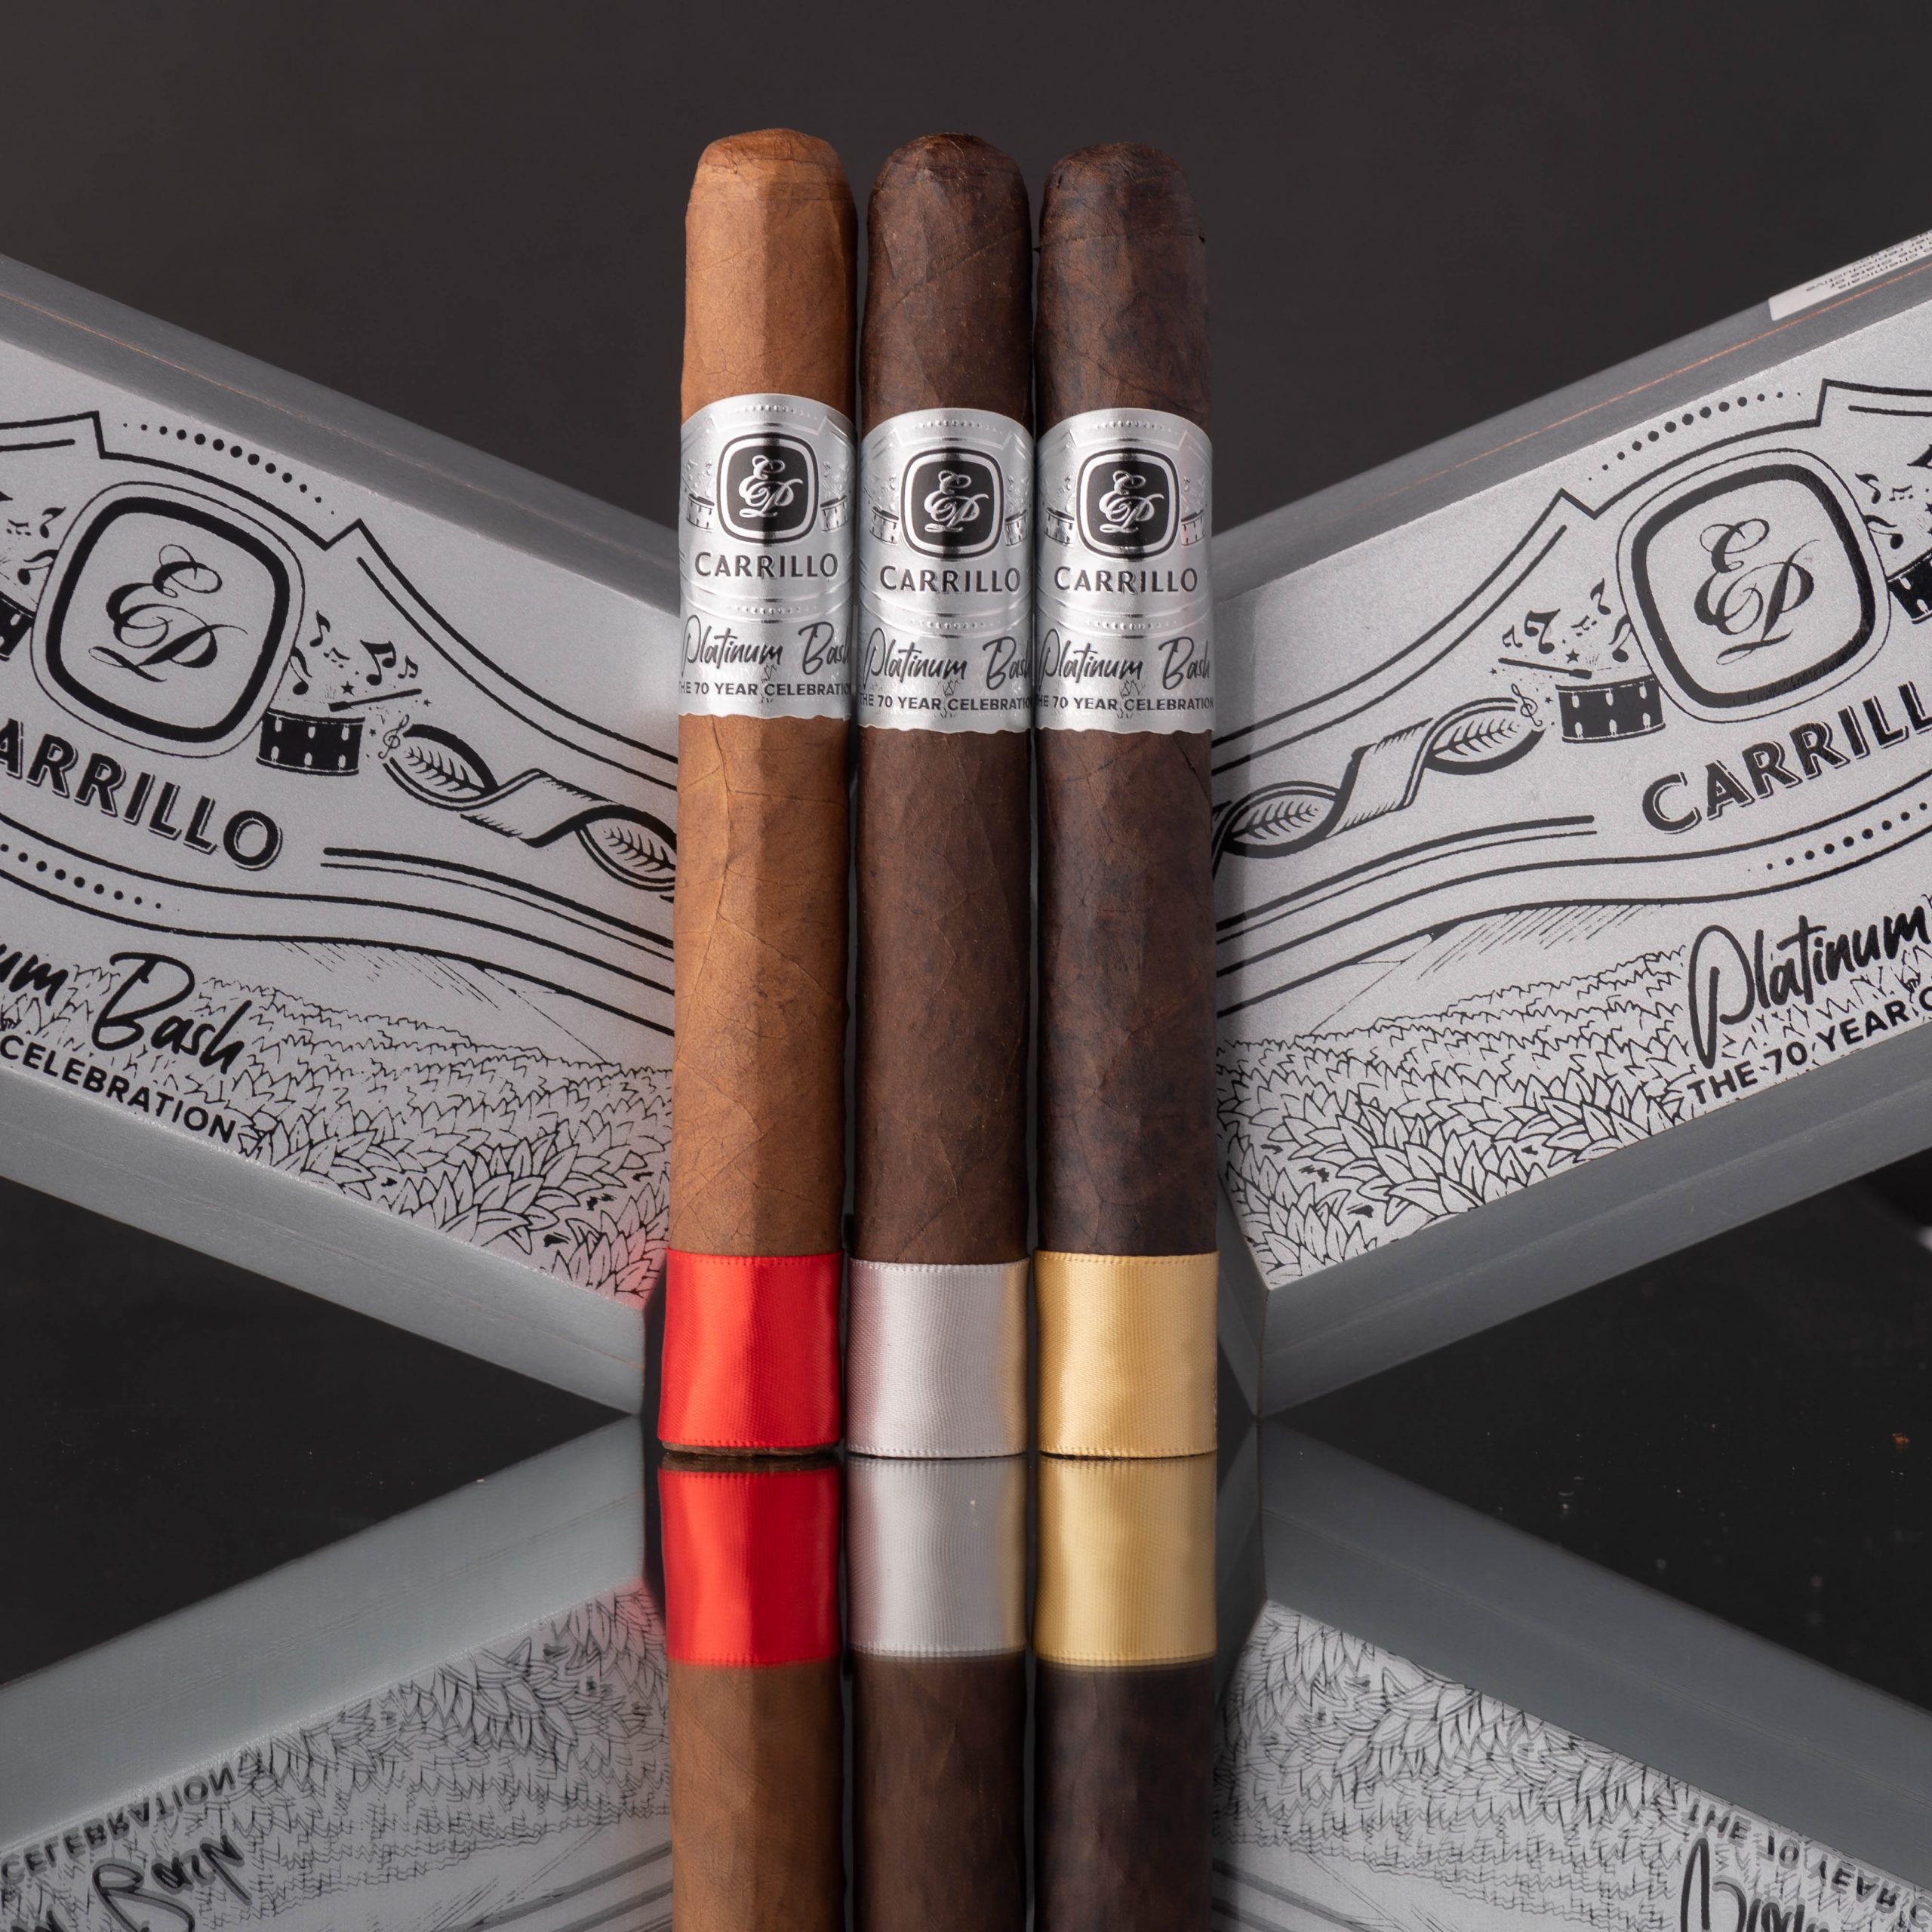 E.P. Carrillo Announces Winning Platinum Bash Cigar Will Be Released In Late April